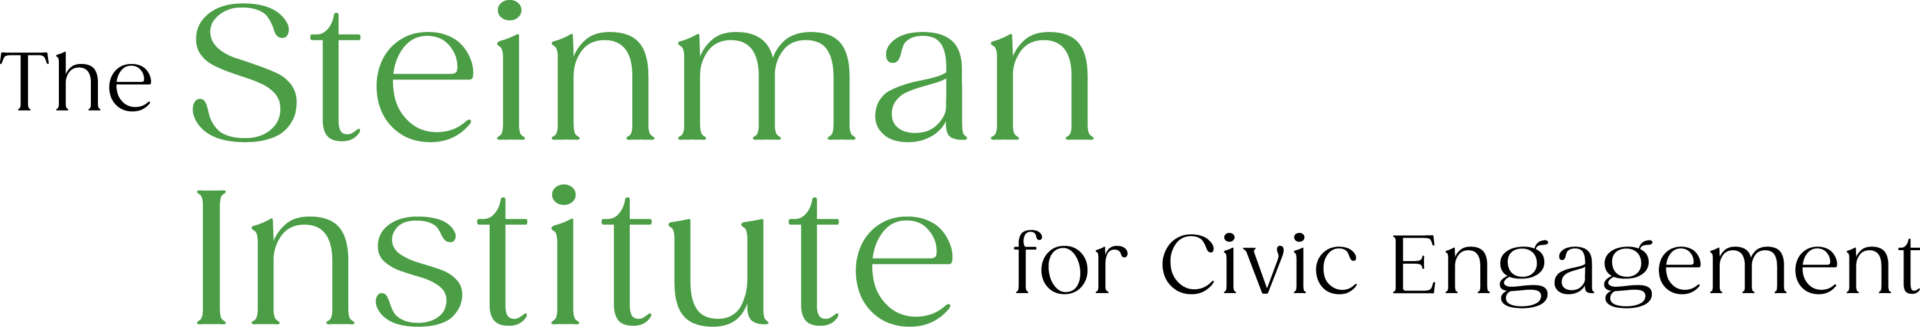 The Steinman Institute for Civic Engagement logo